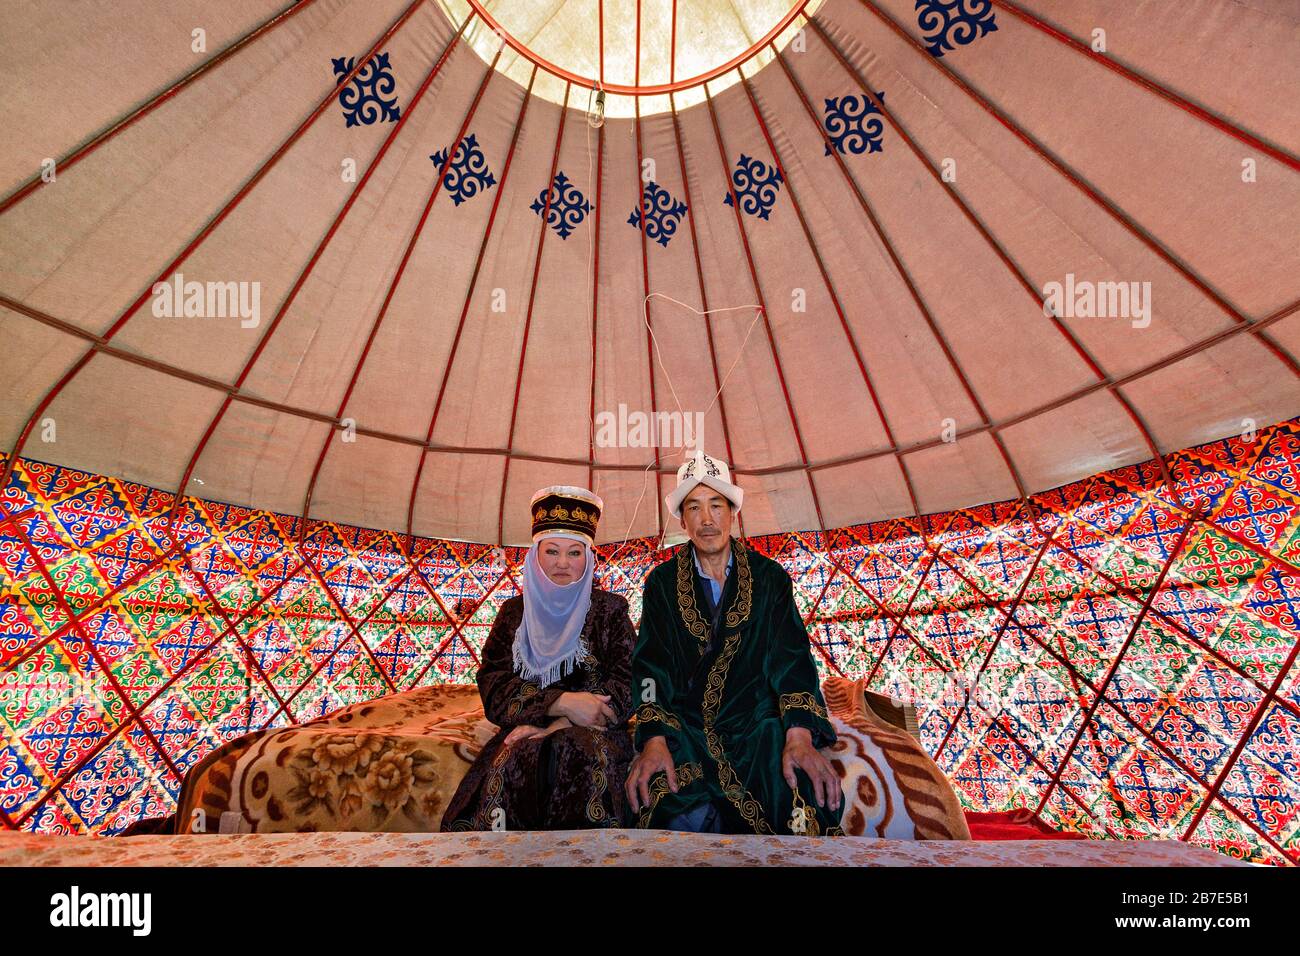 An elderly Kyrgyz couple in traditional clothing looks 